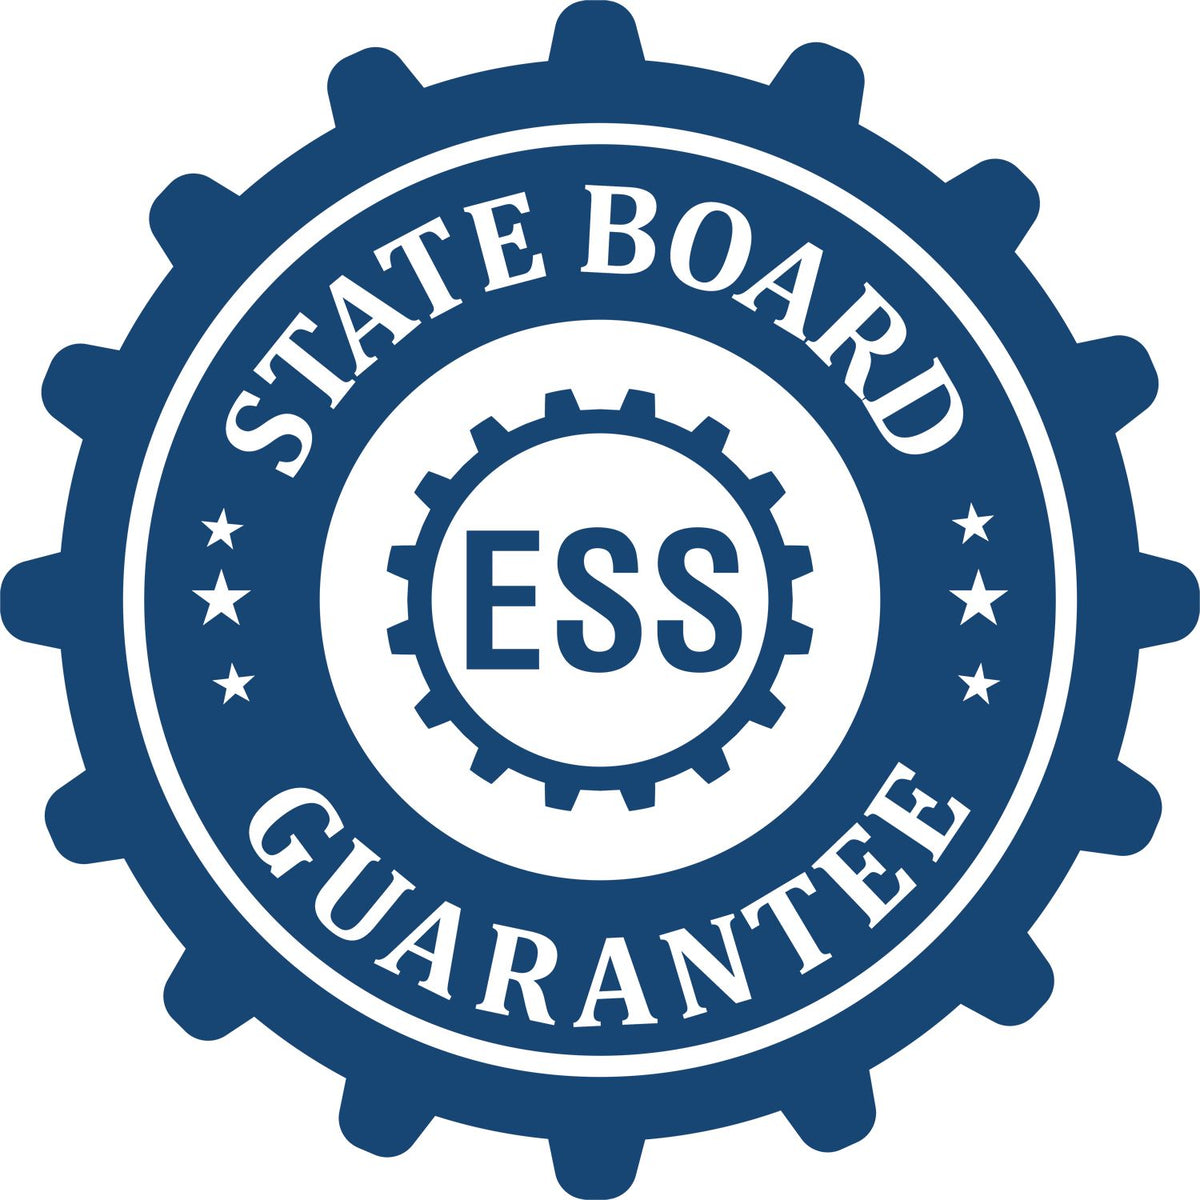 An emblem in a gear shape illustrating a state board guarantee for the Premium MaxLight Pre-Inked Wyoming Landscape Architectural Stamp product.